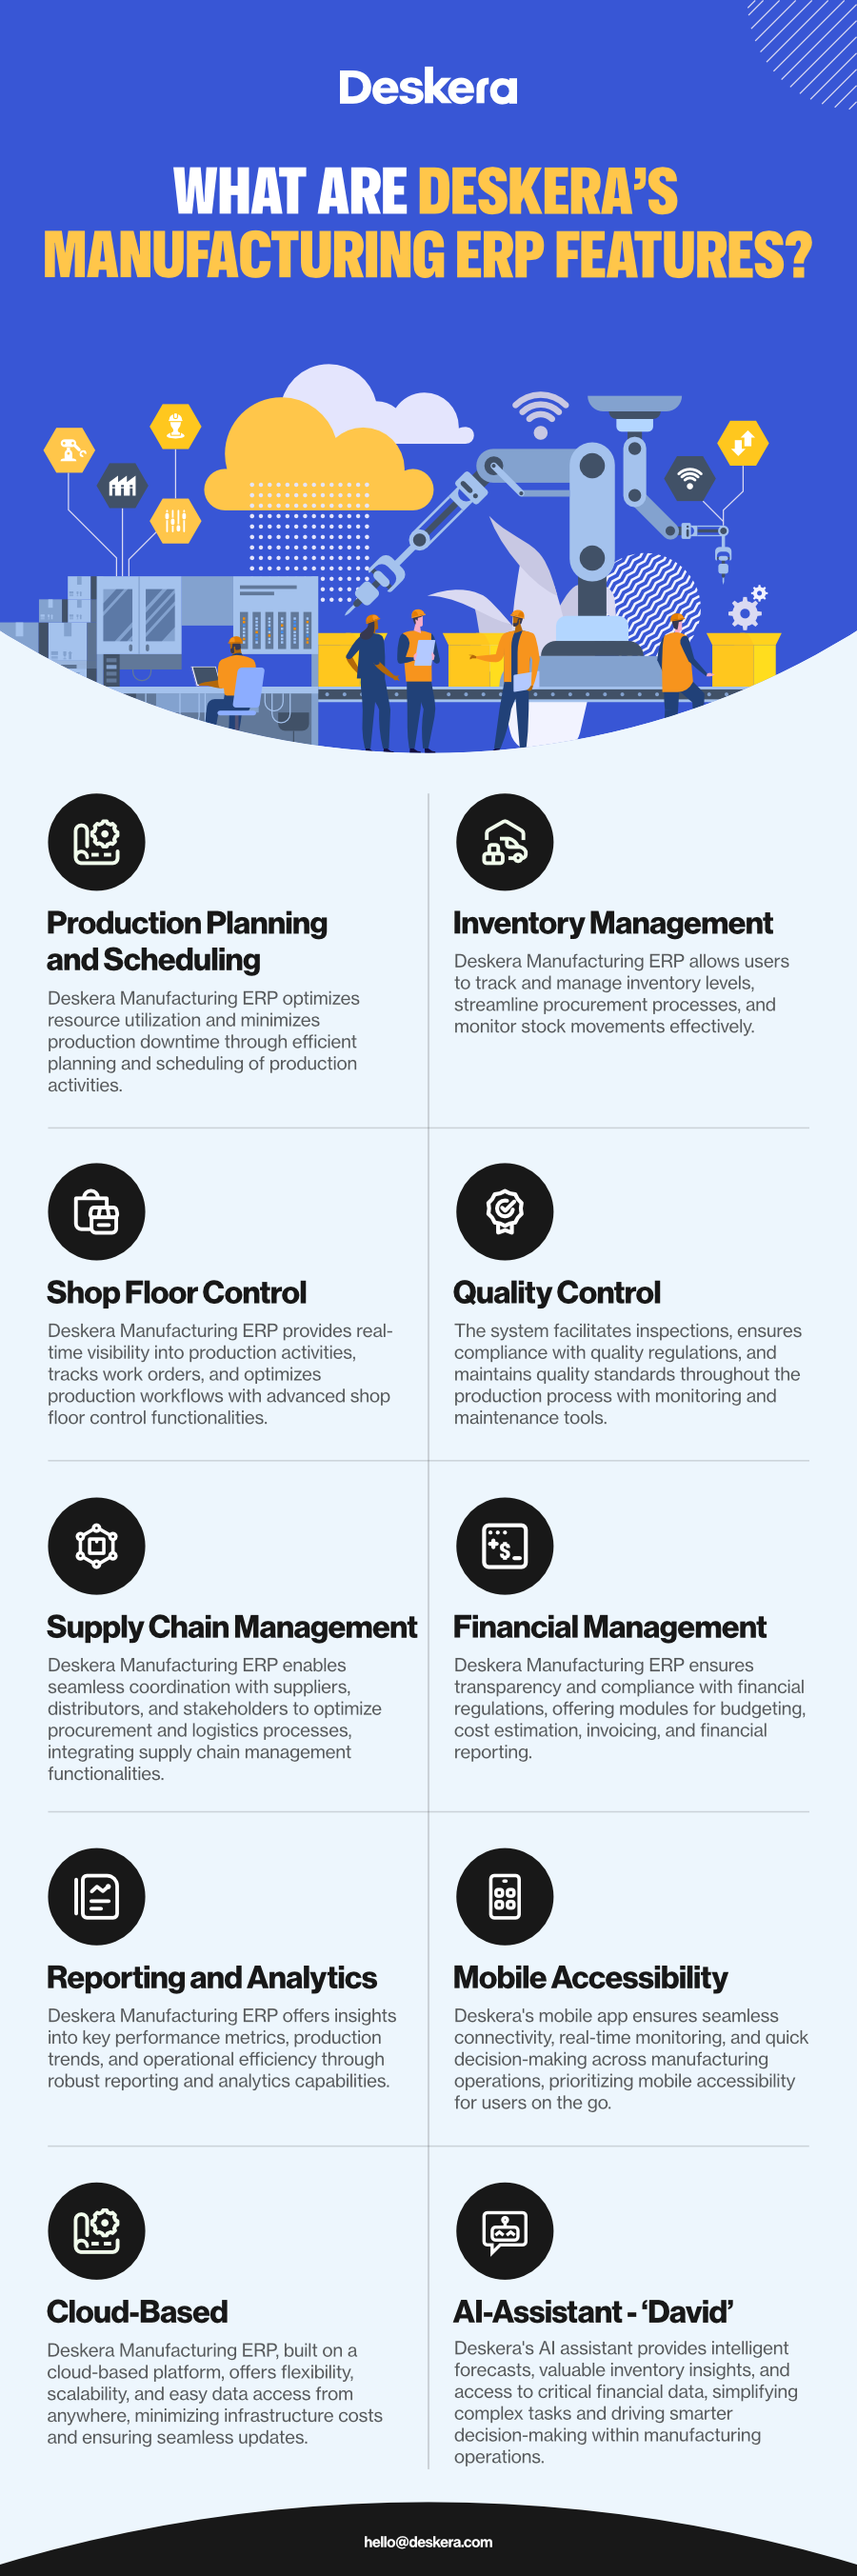 Key features of Deskera's manufacturing ERP are AI-assitant 'David', mobile accessibility, reporting and analytics, inventory management, production planning and scheduling, cloud-based, and more.